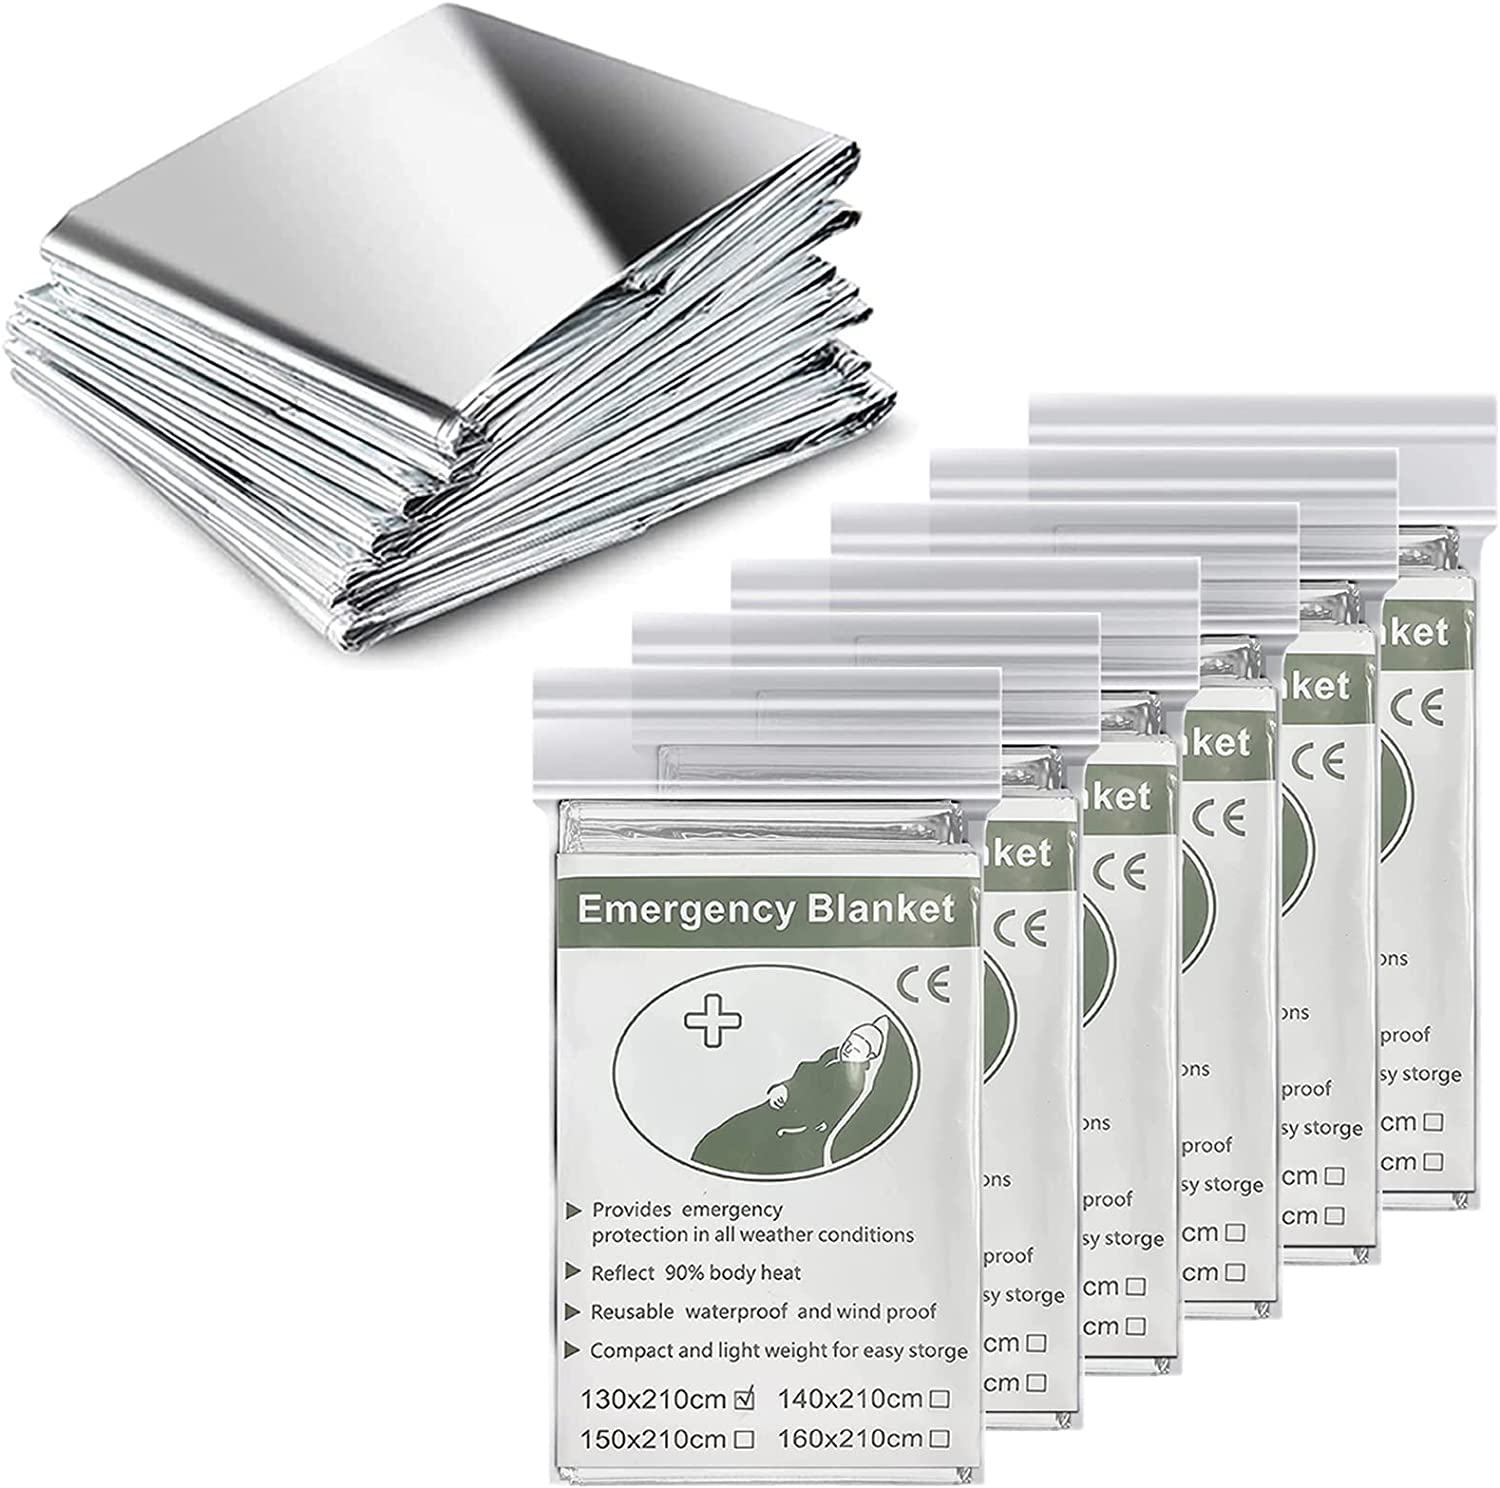 CANNABMALL 6 Pack Emergency Thermal Blankets, Silver Highly Reflective Mylar Film Garden Greenhouse Farming Covering Sheets for Plant Growth, Foil Space Blanket for First Aid, Camping Outdoor Survival